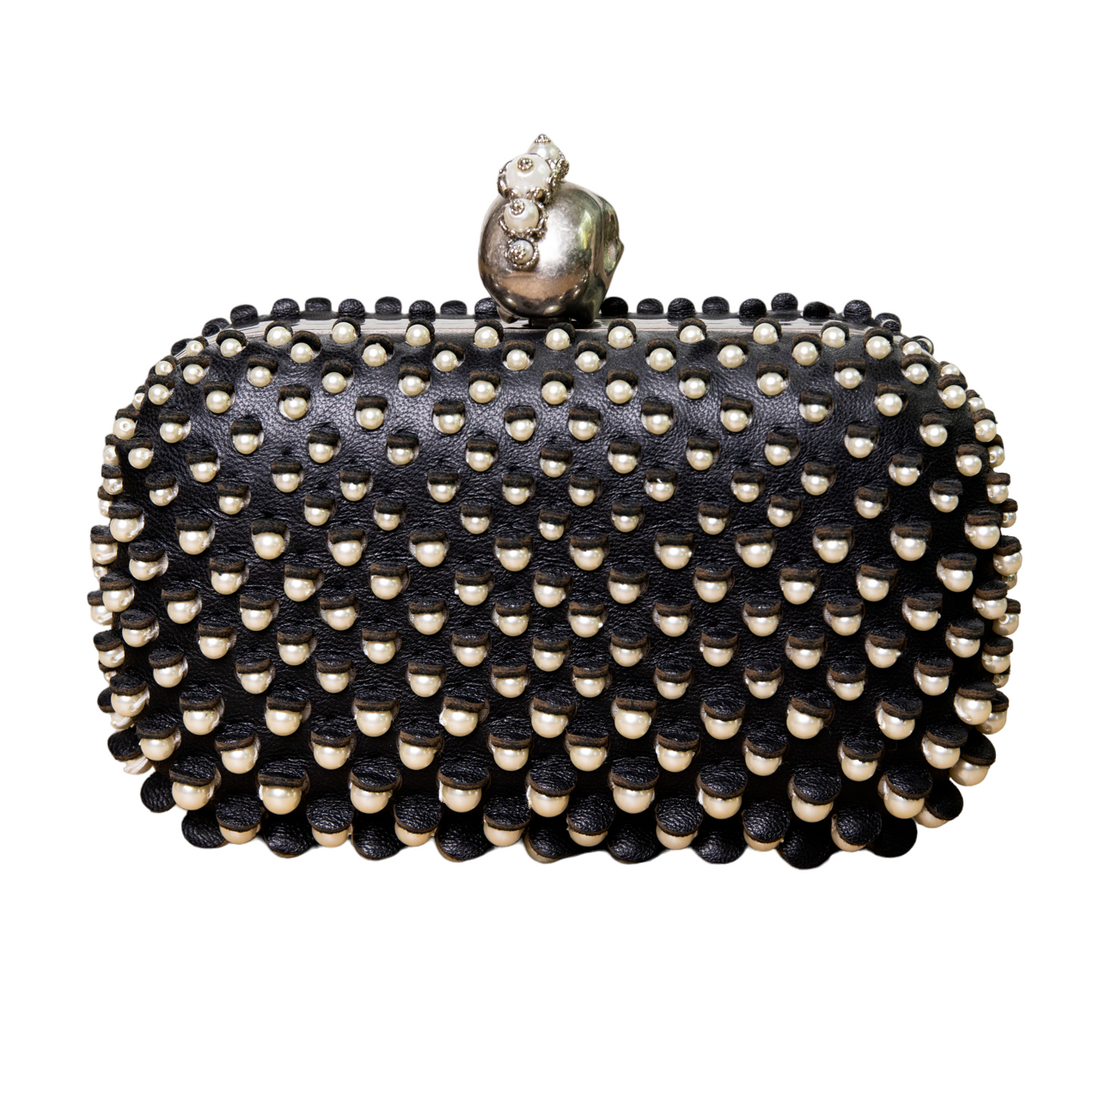 Alexander McQueen beaded box clutch with signature clasp